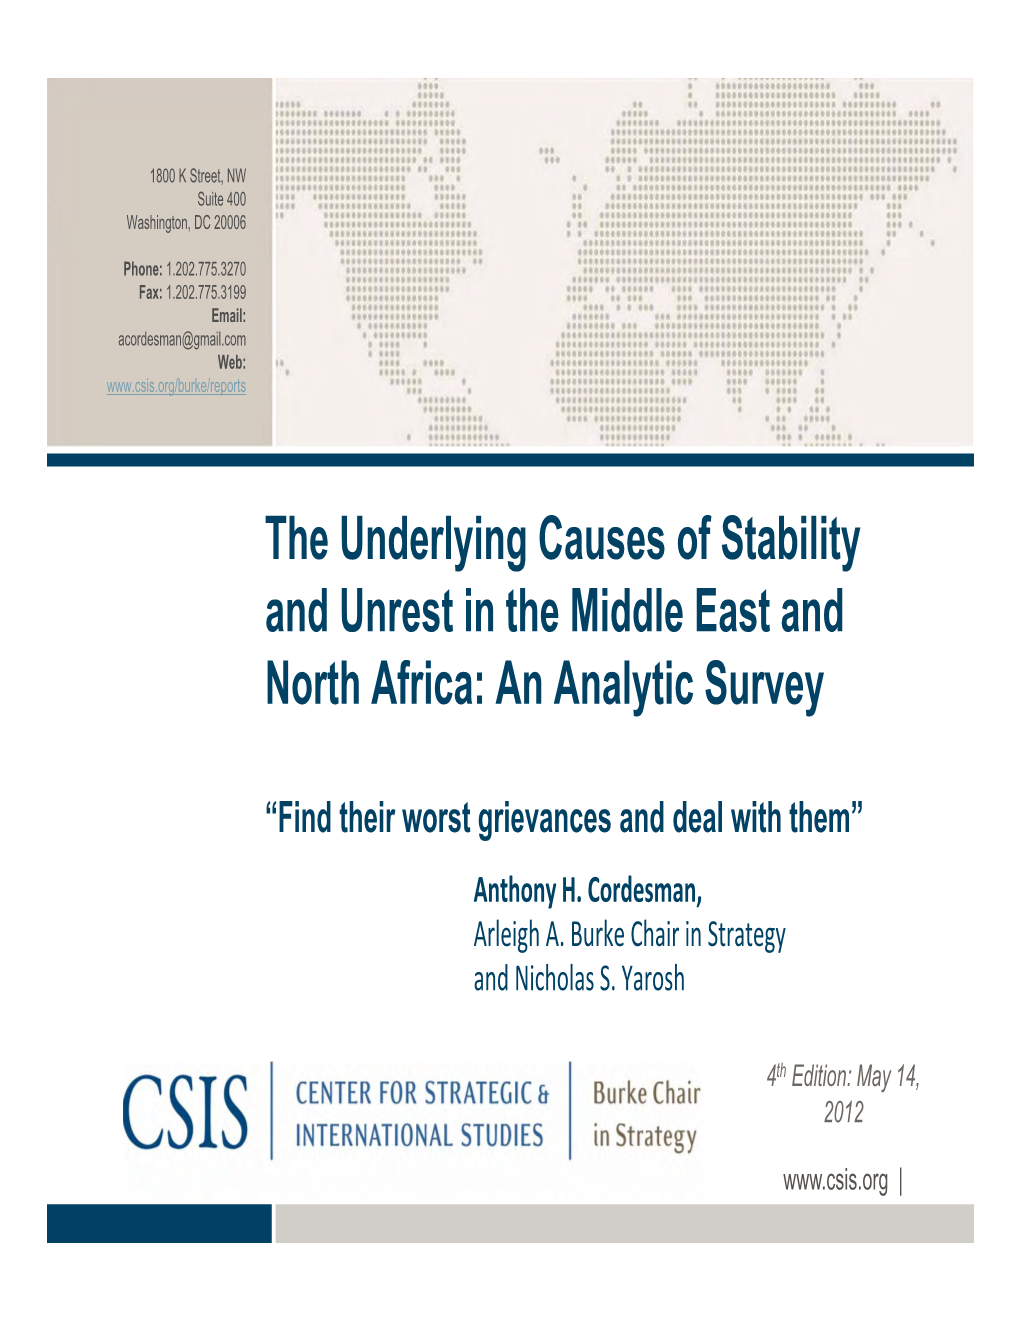 The Underlying Causes of Stability and Unrest in the Middle East and North Africa: an Analytic Survey